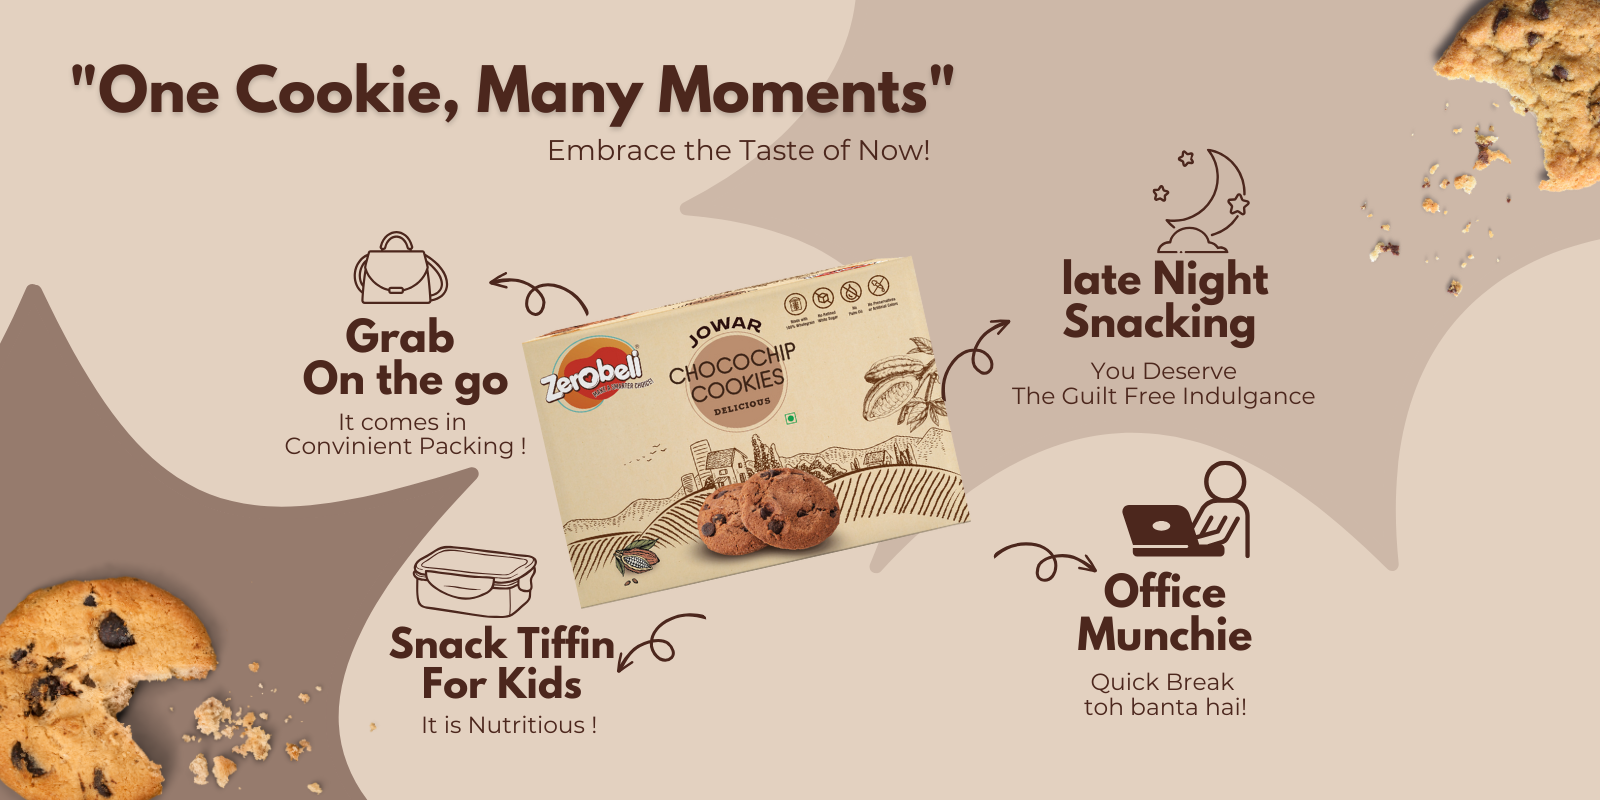 Jowar_Choco_chip_Cookie_-_Moments_eb6ef479-6d49-4db2-81d3-156c9469c15a.png